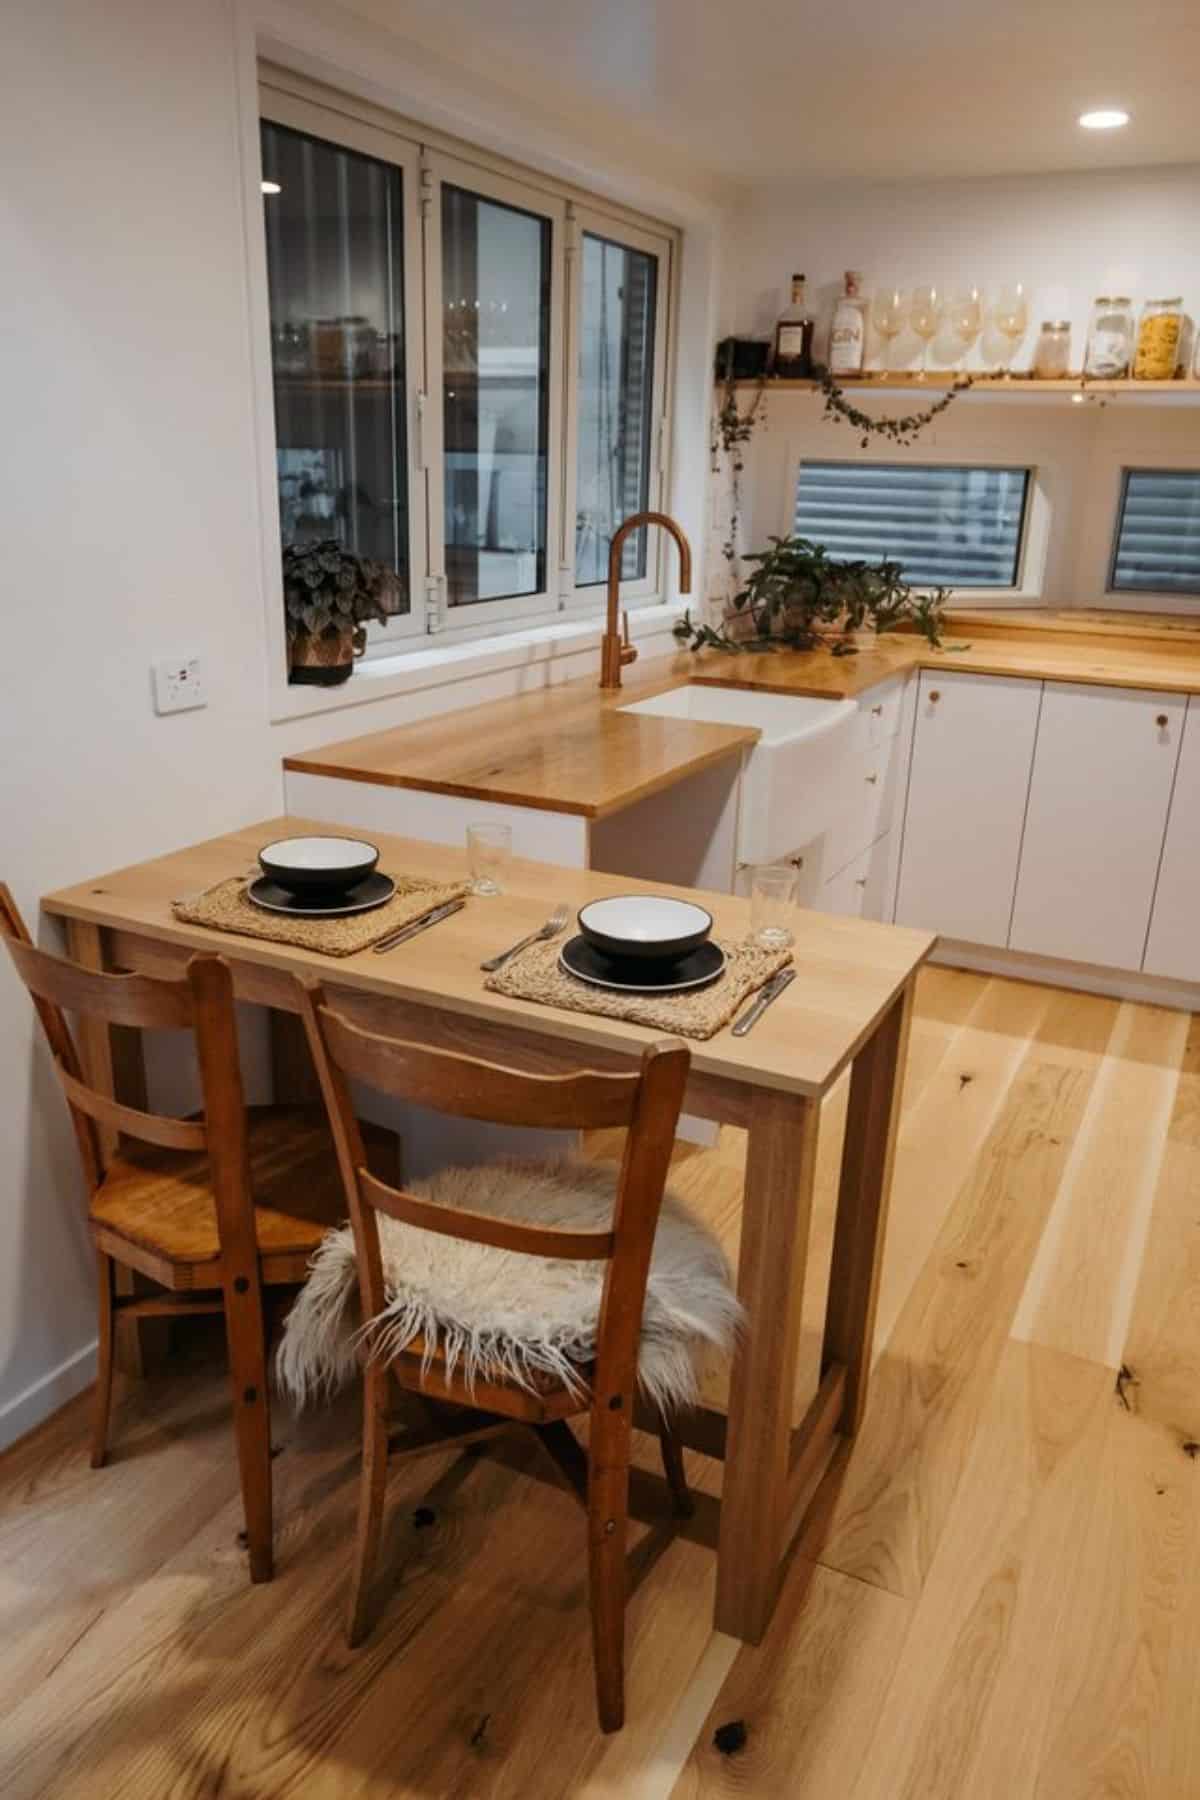 dining table with chairs besides the kitchen countertop